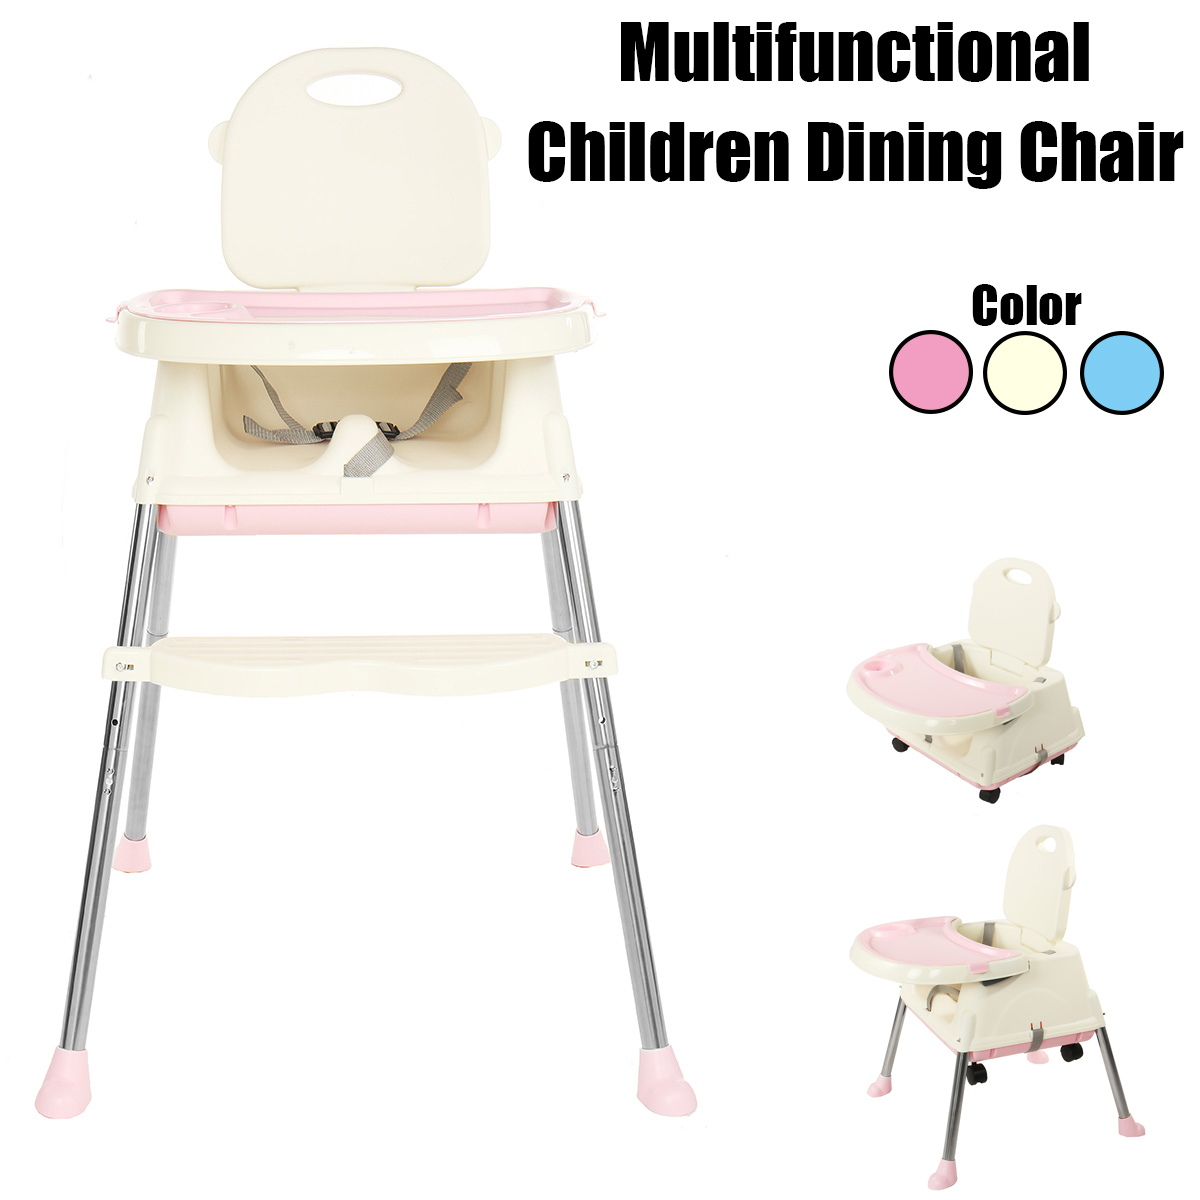 KUDOSALE-3-in-1-Adjustable-Baby-High-Chair-Table-Convertible-Play-Seat-Booster-Toddler-Feeding-with--1749429-2